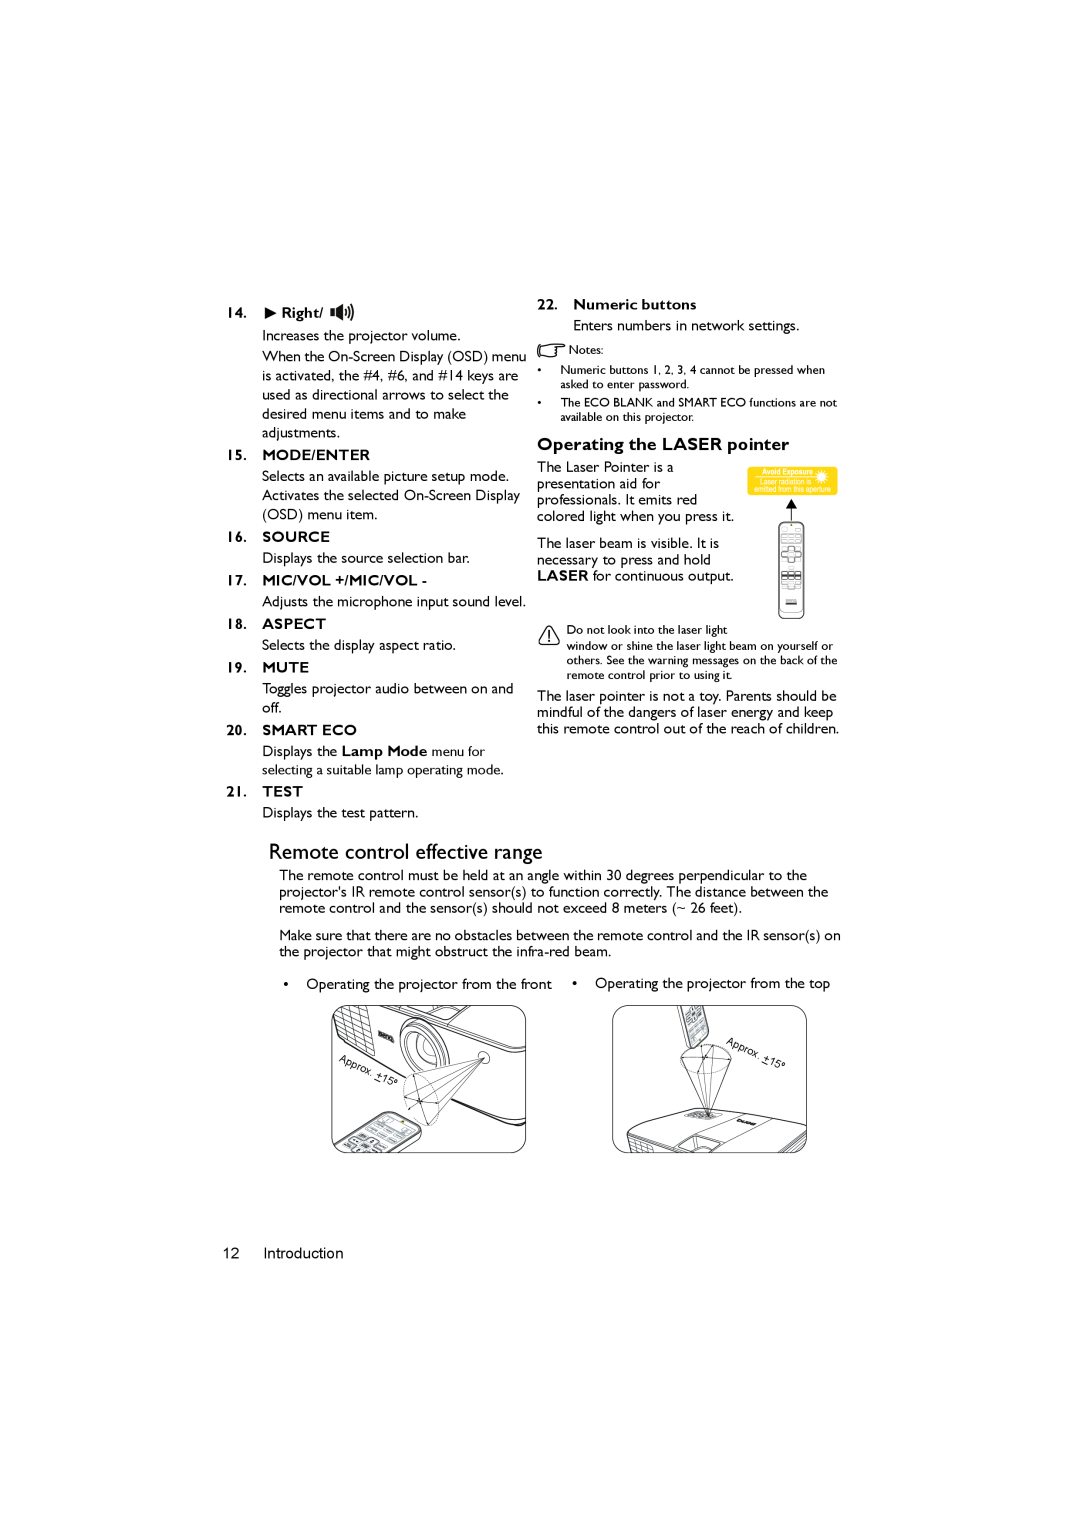 BenQ MX722 user manual Remote control effective range, Operating the LASER pointer 